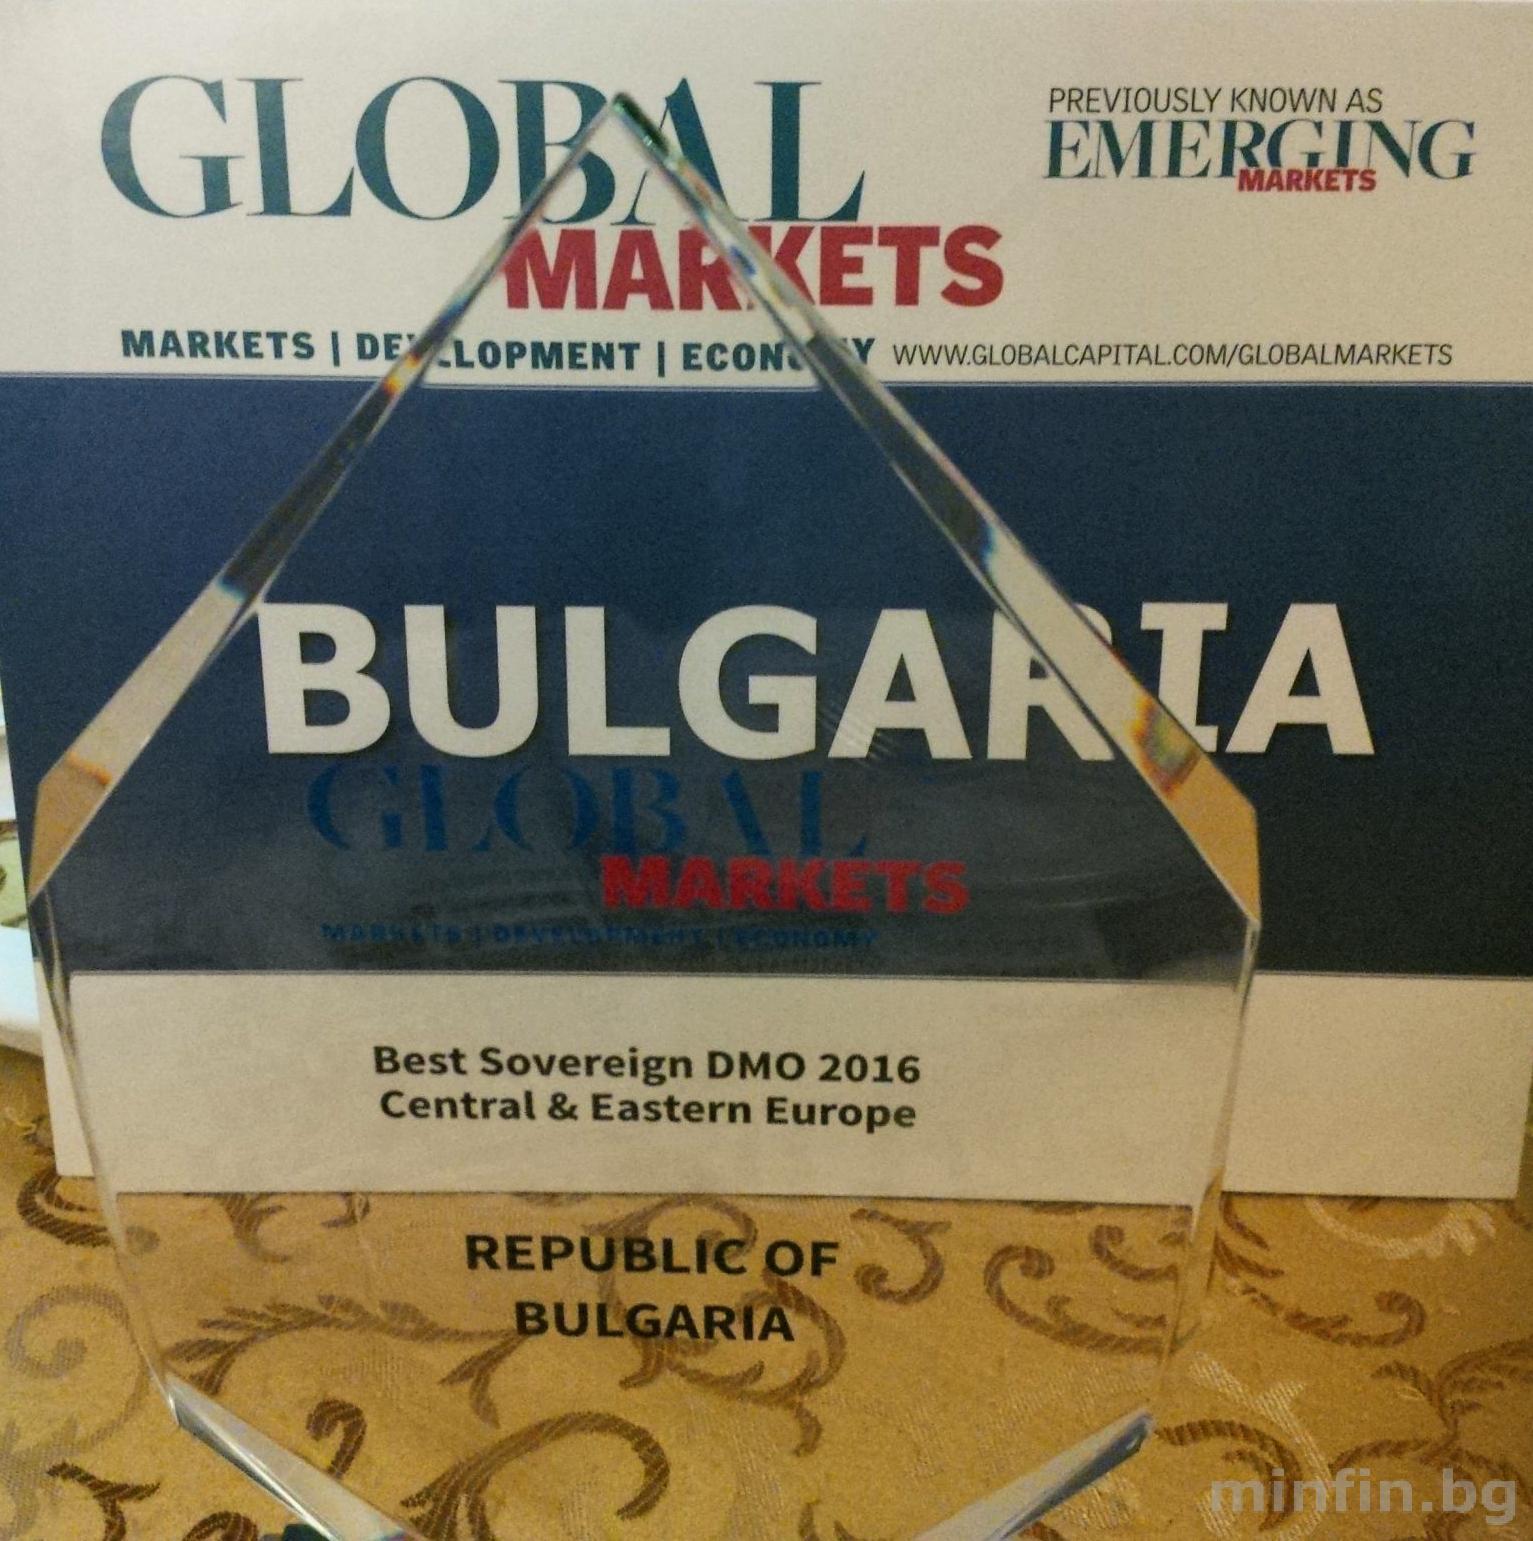 BULGARIA GRANTED BEST SOVEREIGN DMO IN CENTRAL AND EASTERN EUROPE 2016 GLOBAL MARKETS AWARD